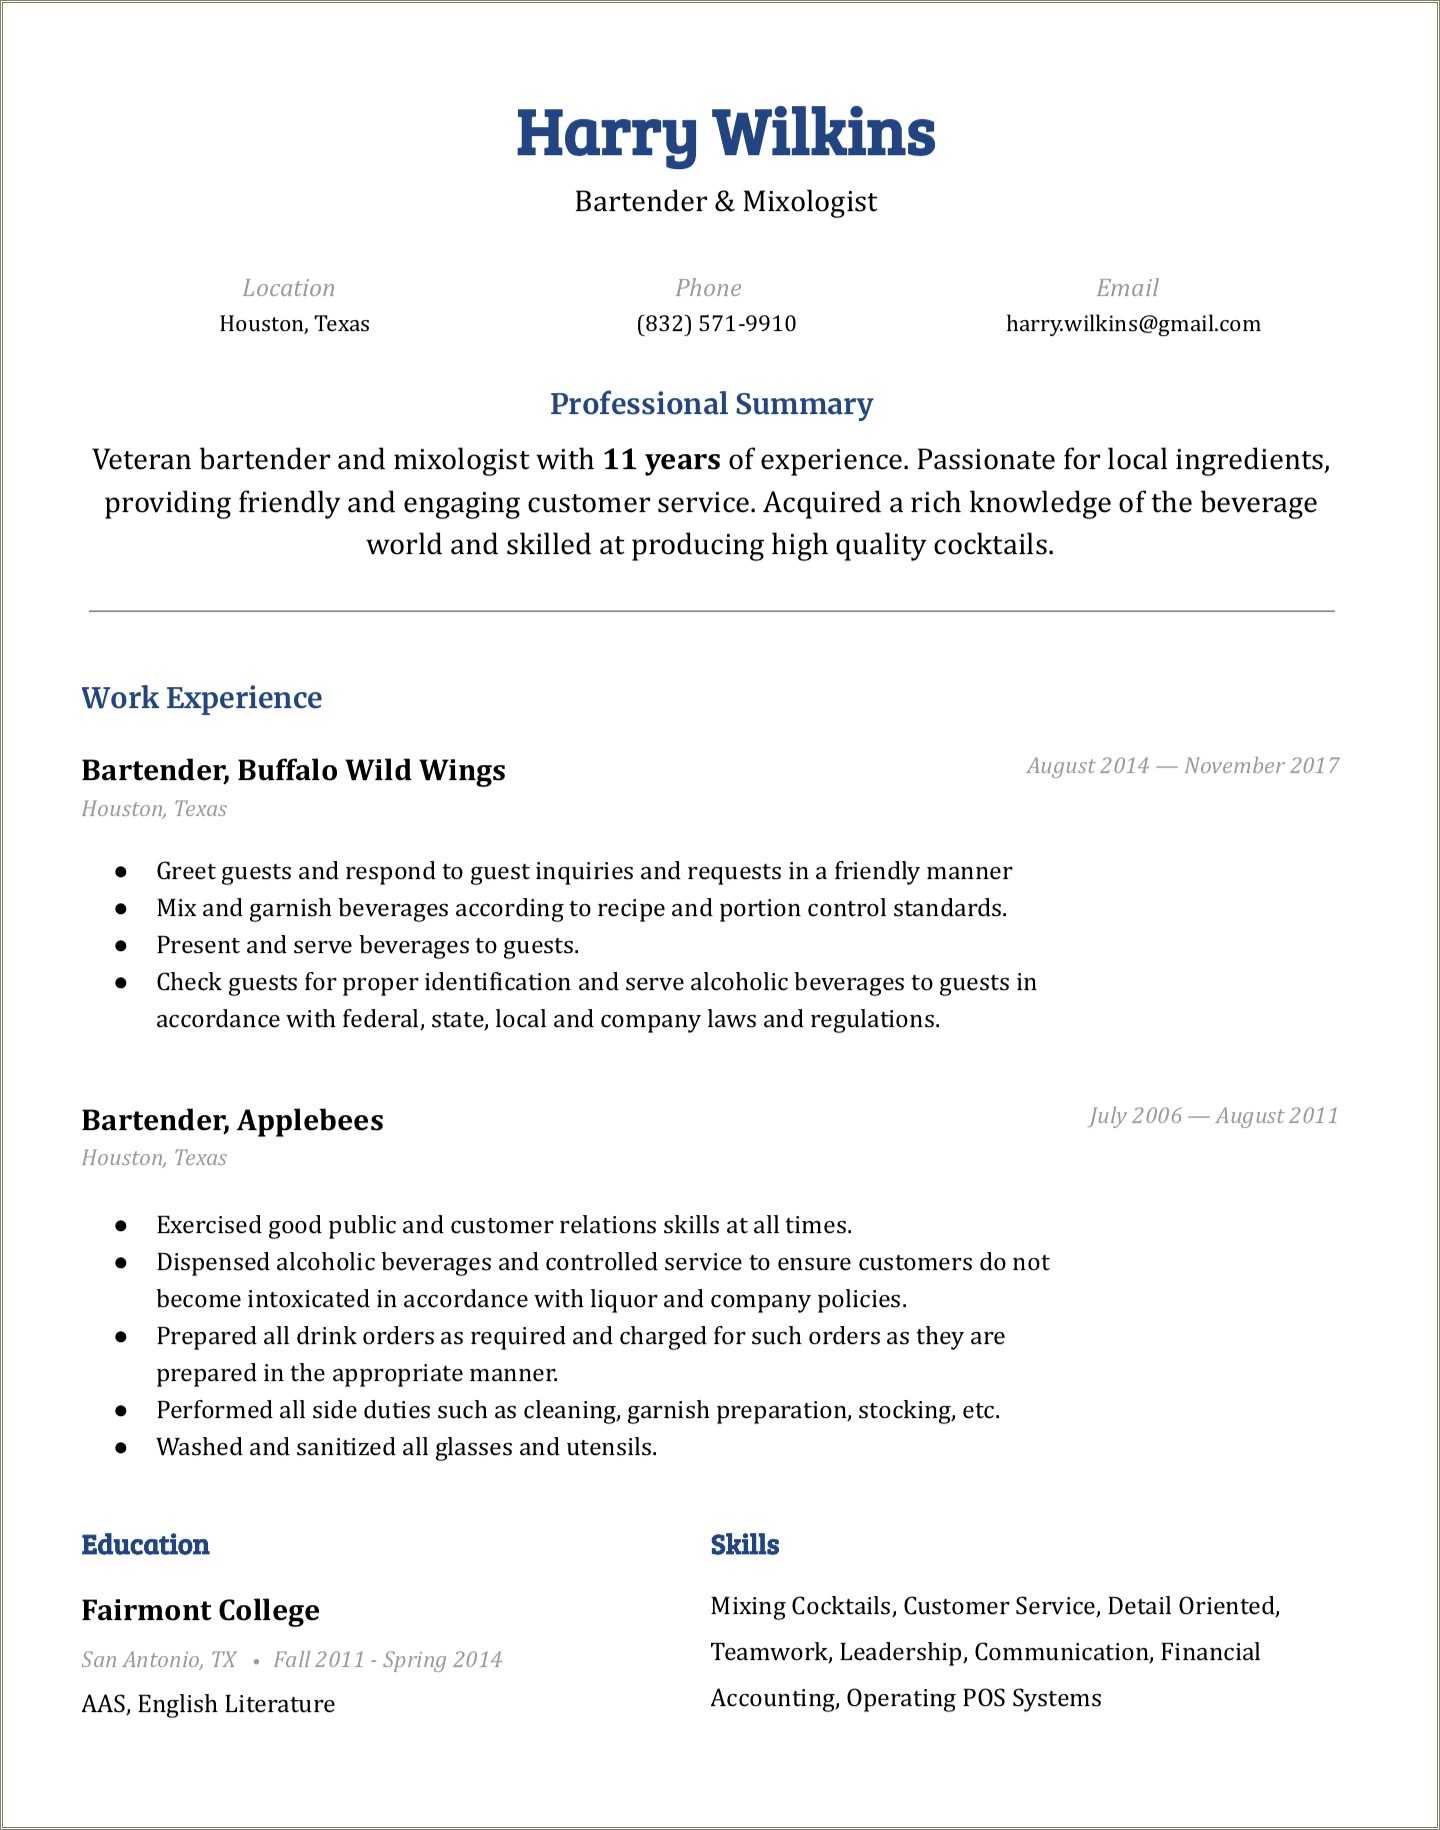 Google Docs Best Format To Download Resume - Resume Example Gallery